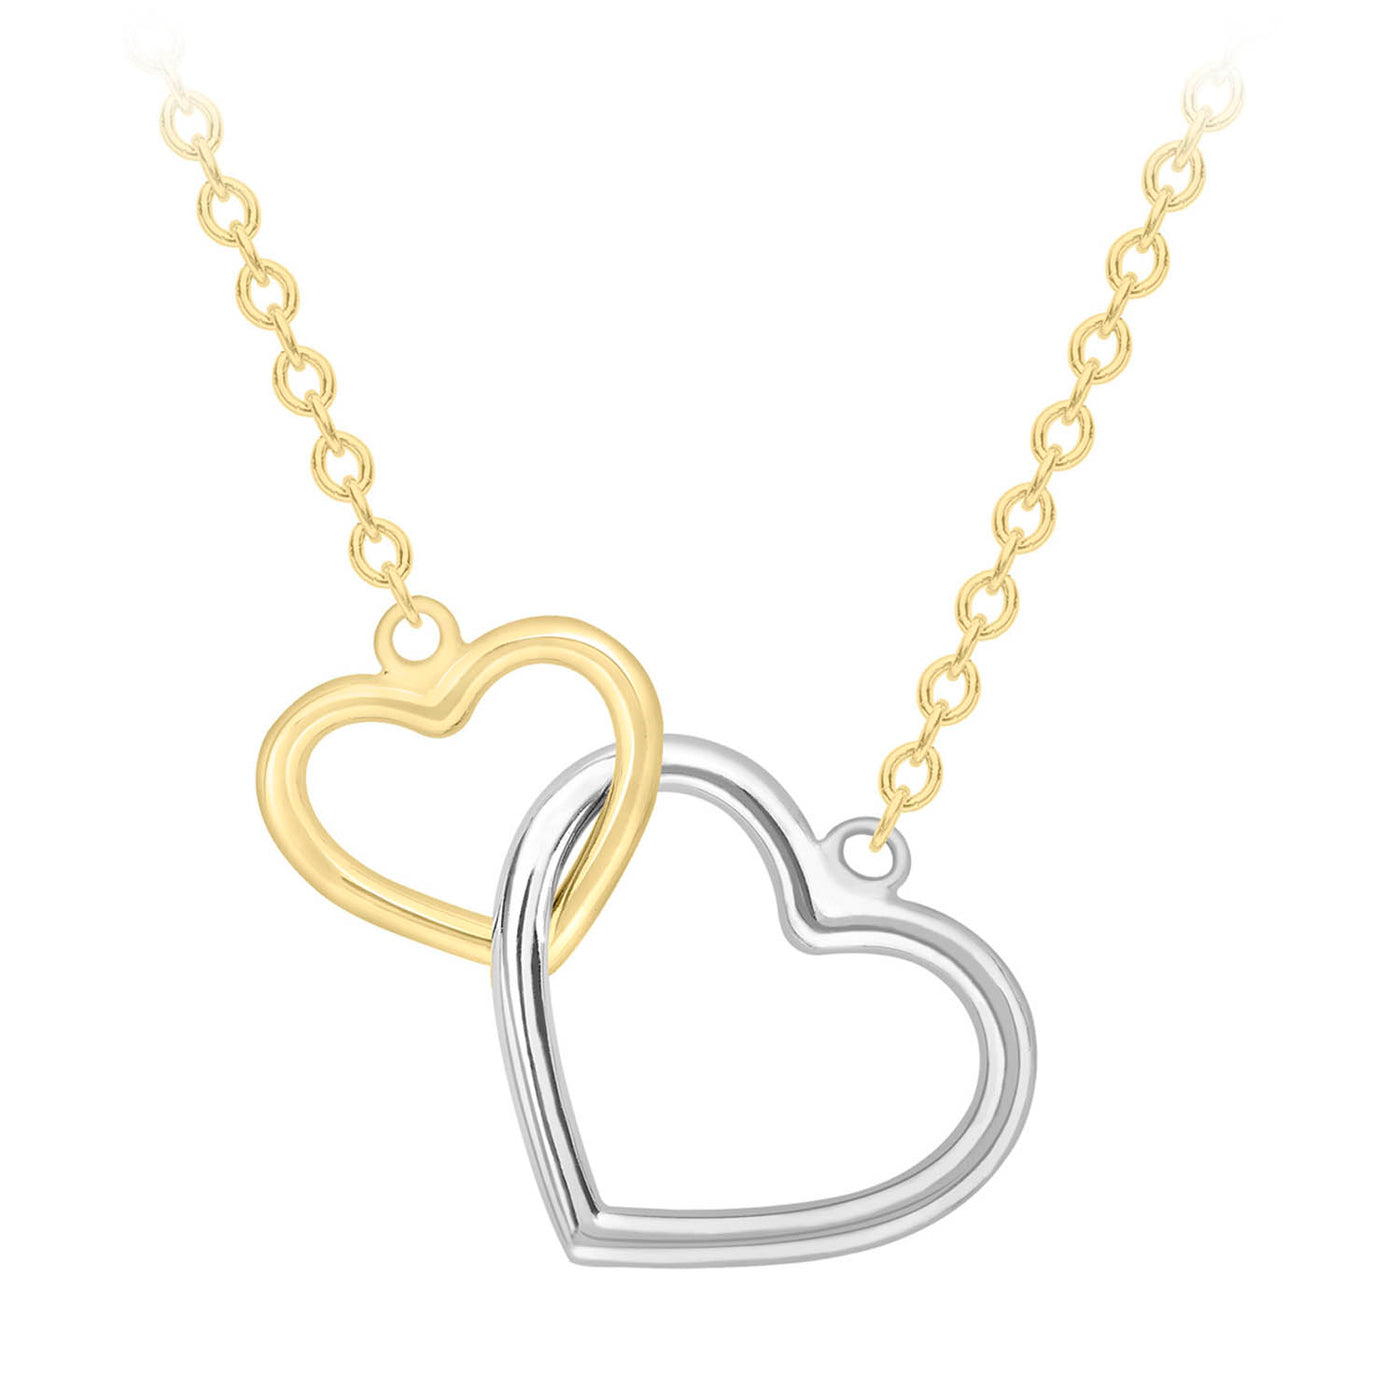 9ct Gold Linked Hearts Necklace.